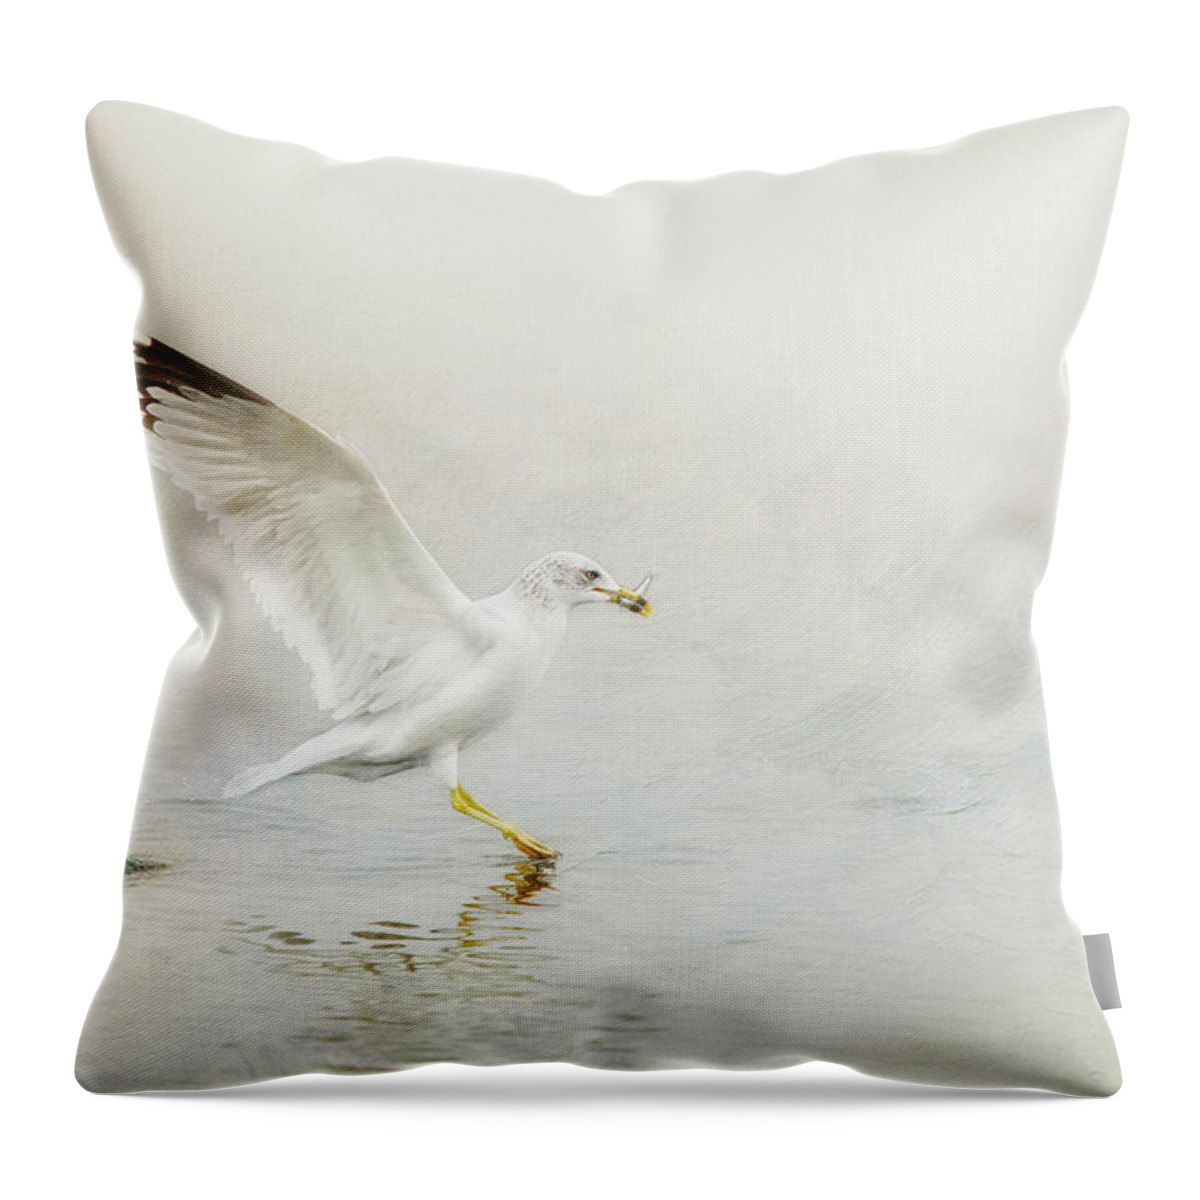 Animal Themes Throw Pillow featuring the photograph Ring-billed Gull With Fish by Susangaryphotography